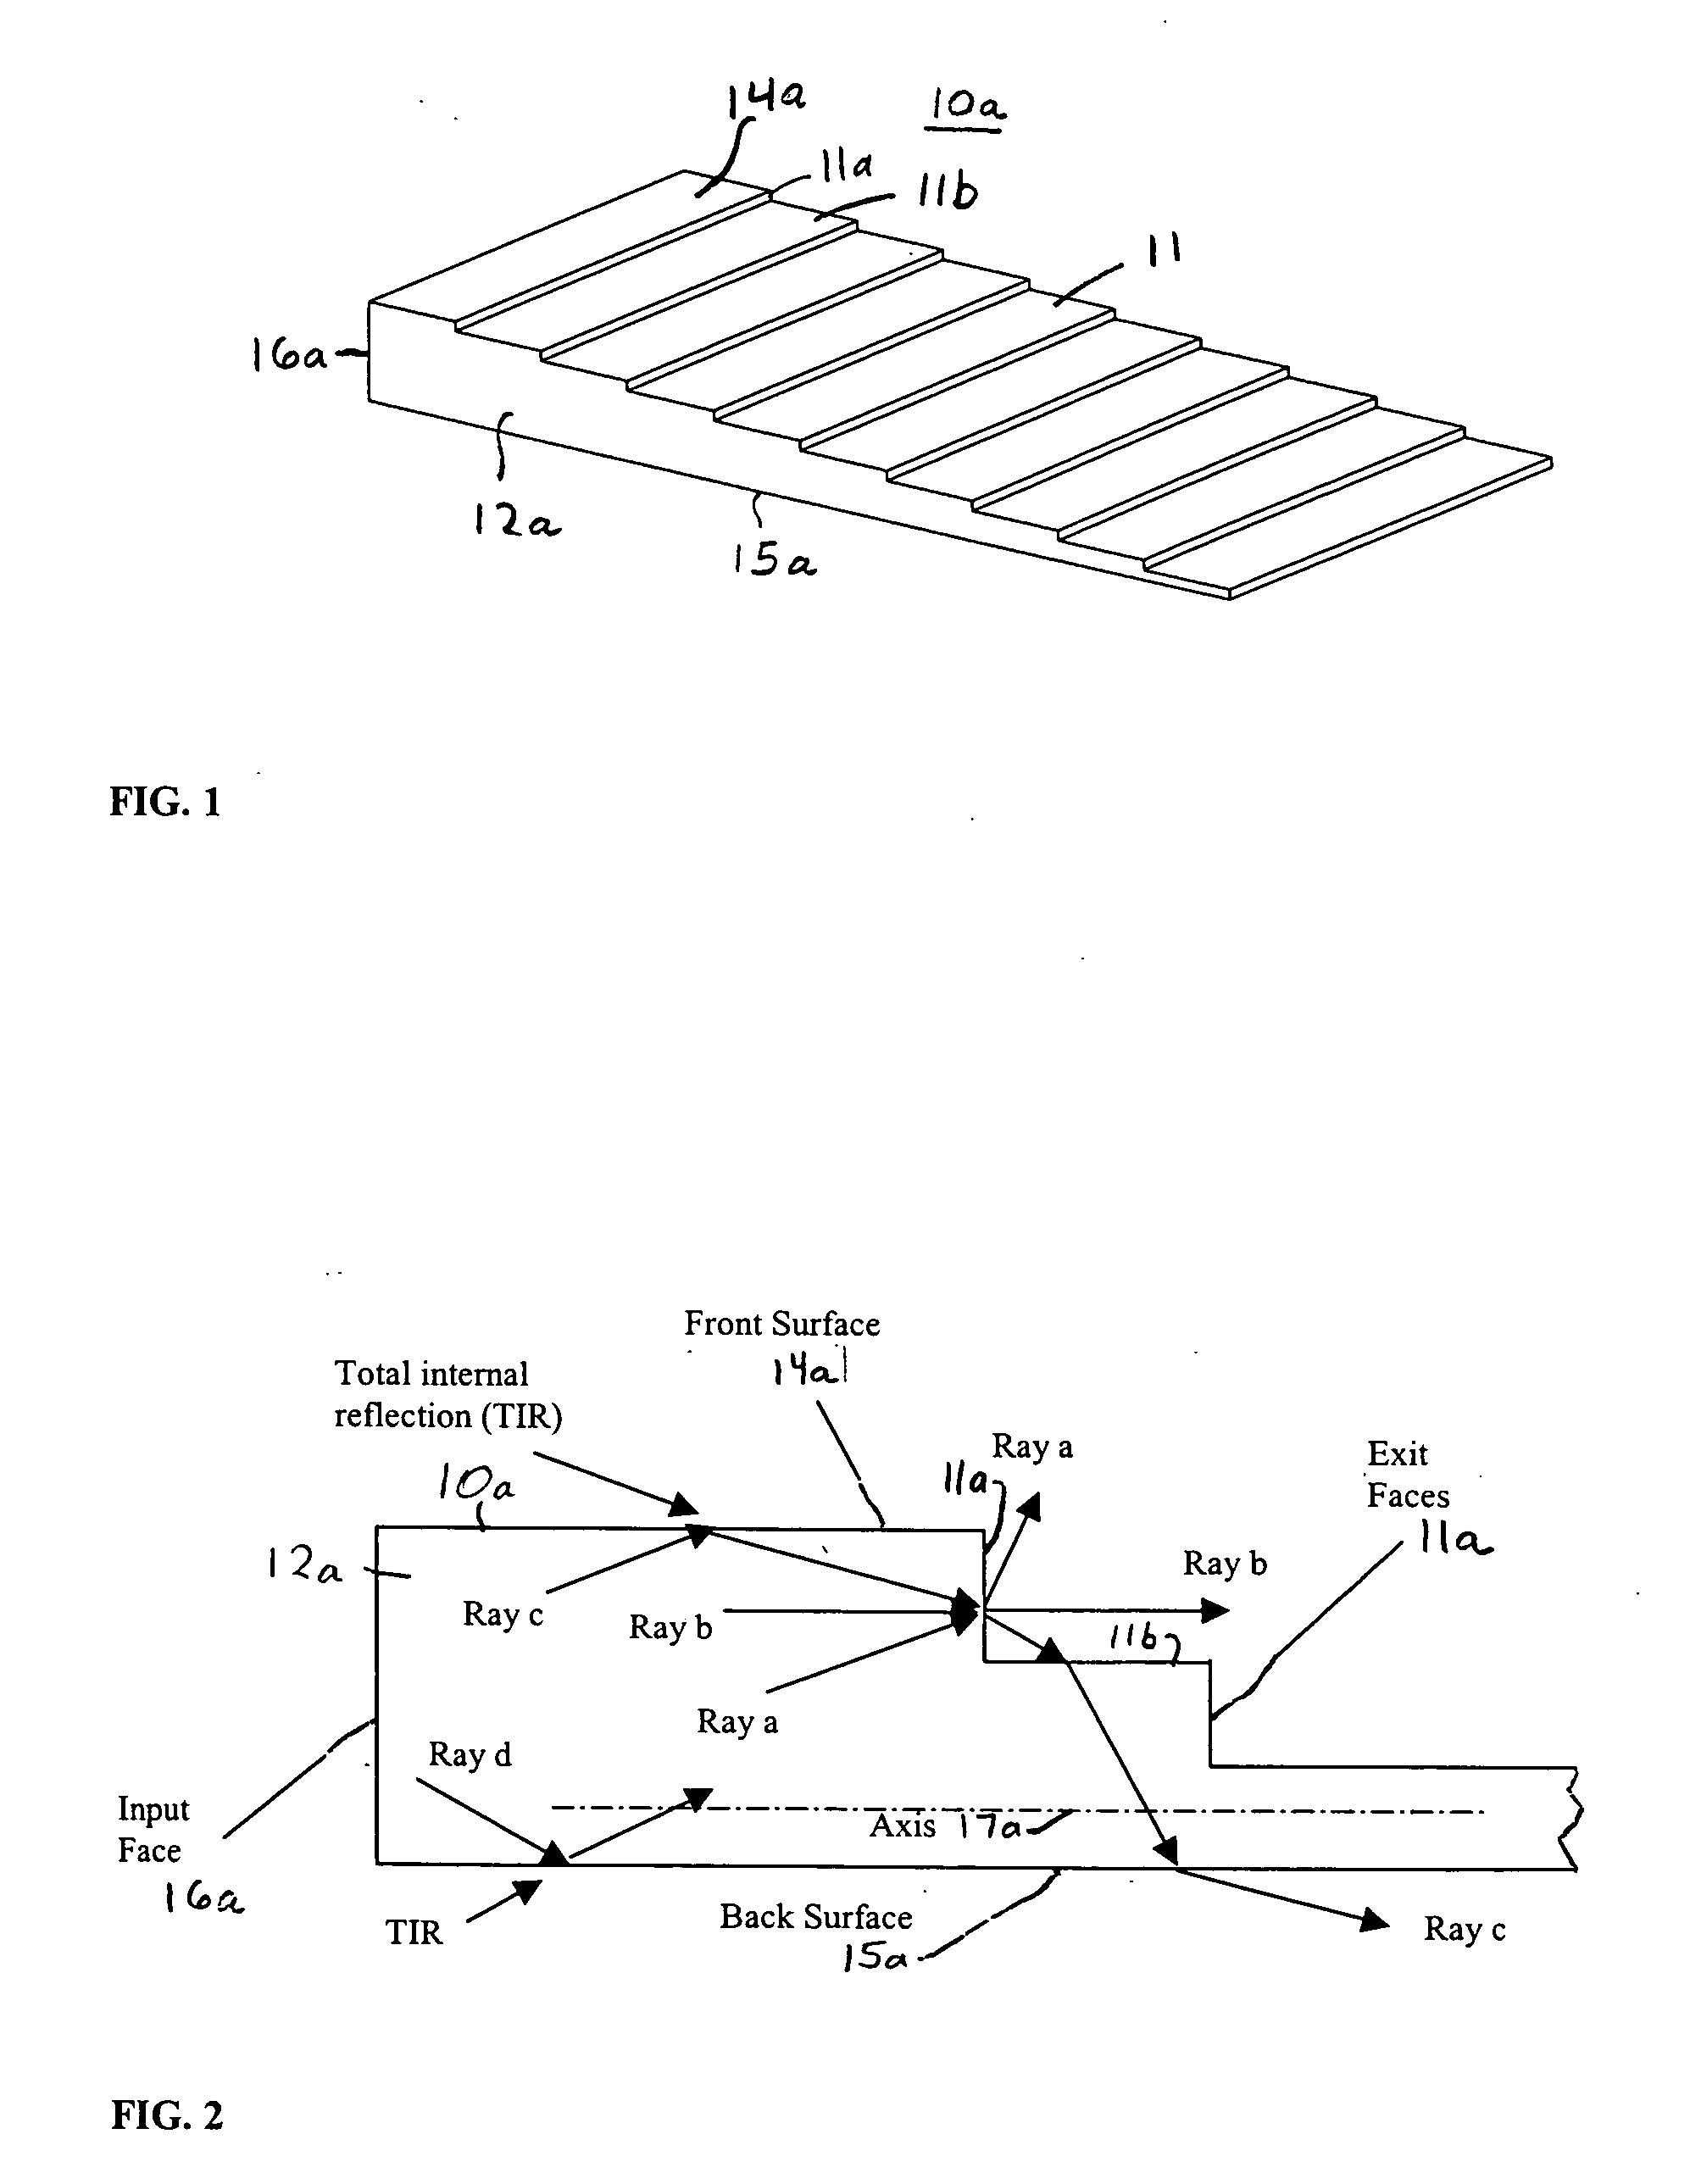 Optical devices for guiding illumination